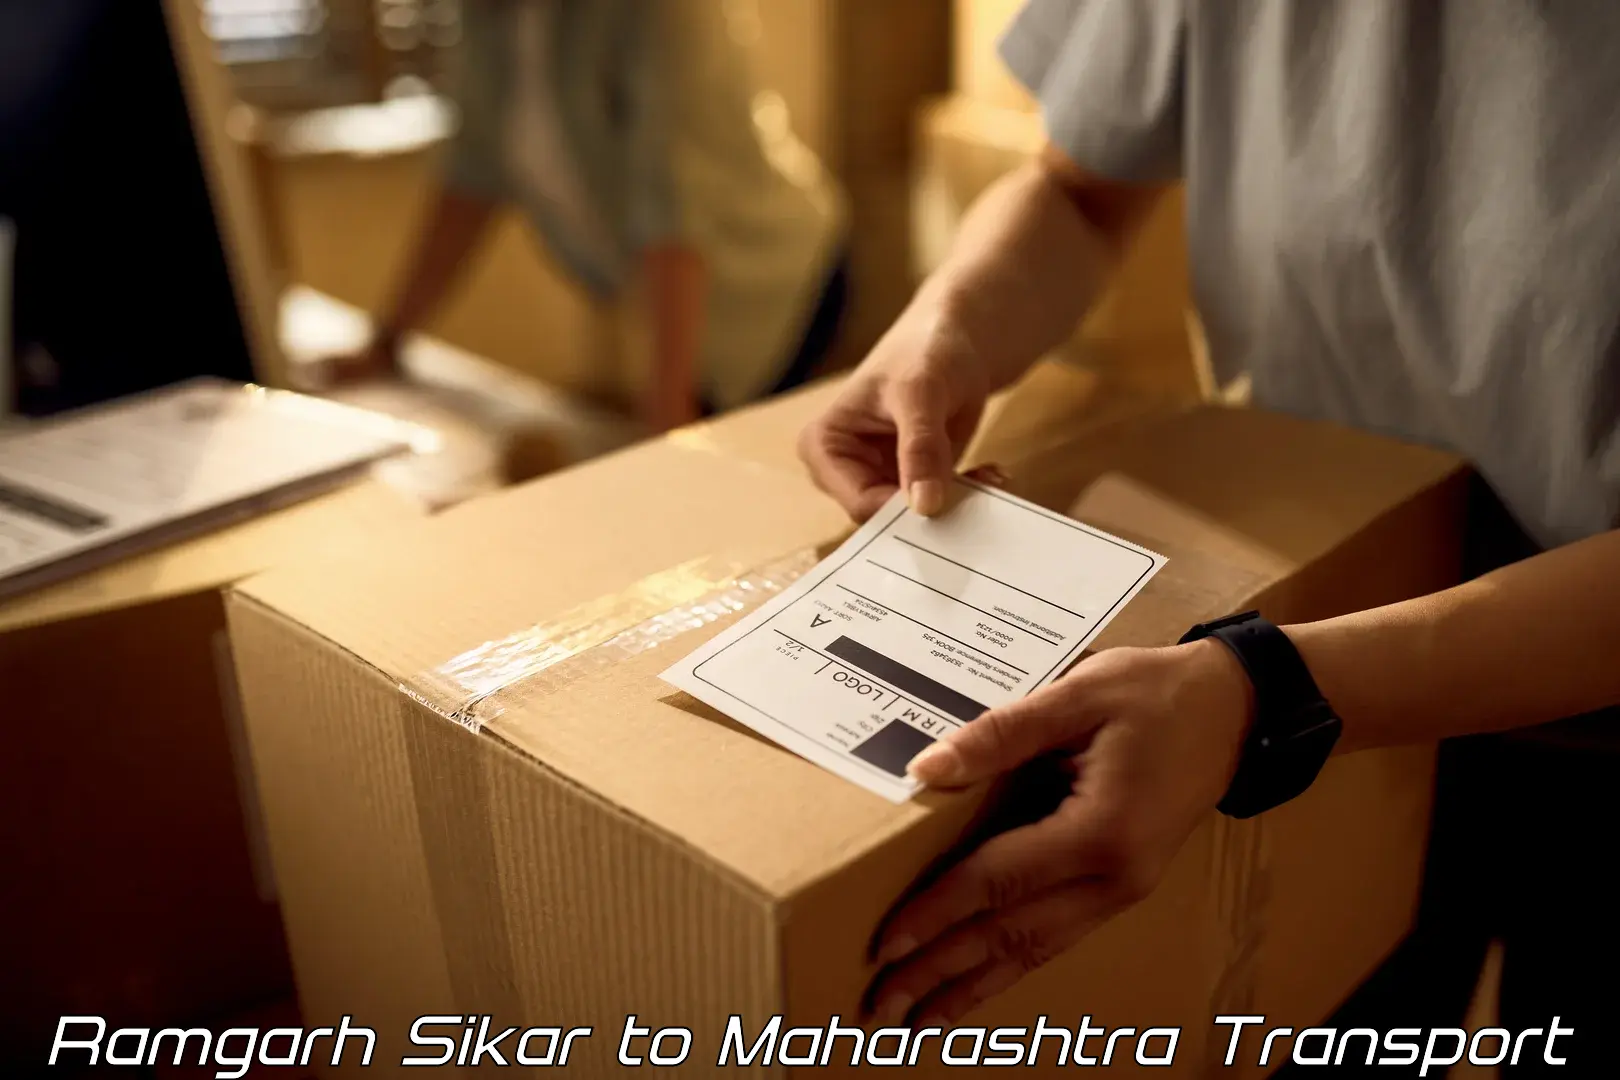 Container transport service Ramgarh Sikar to Indapur